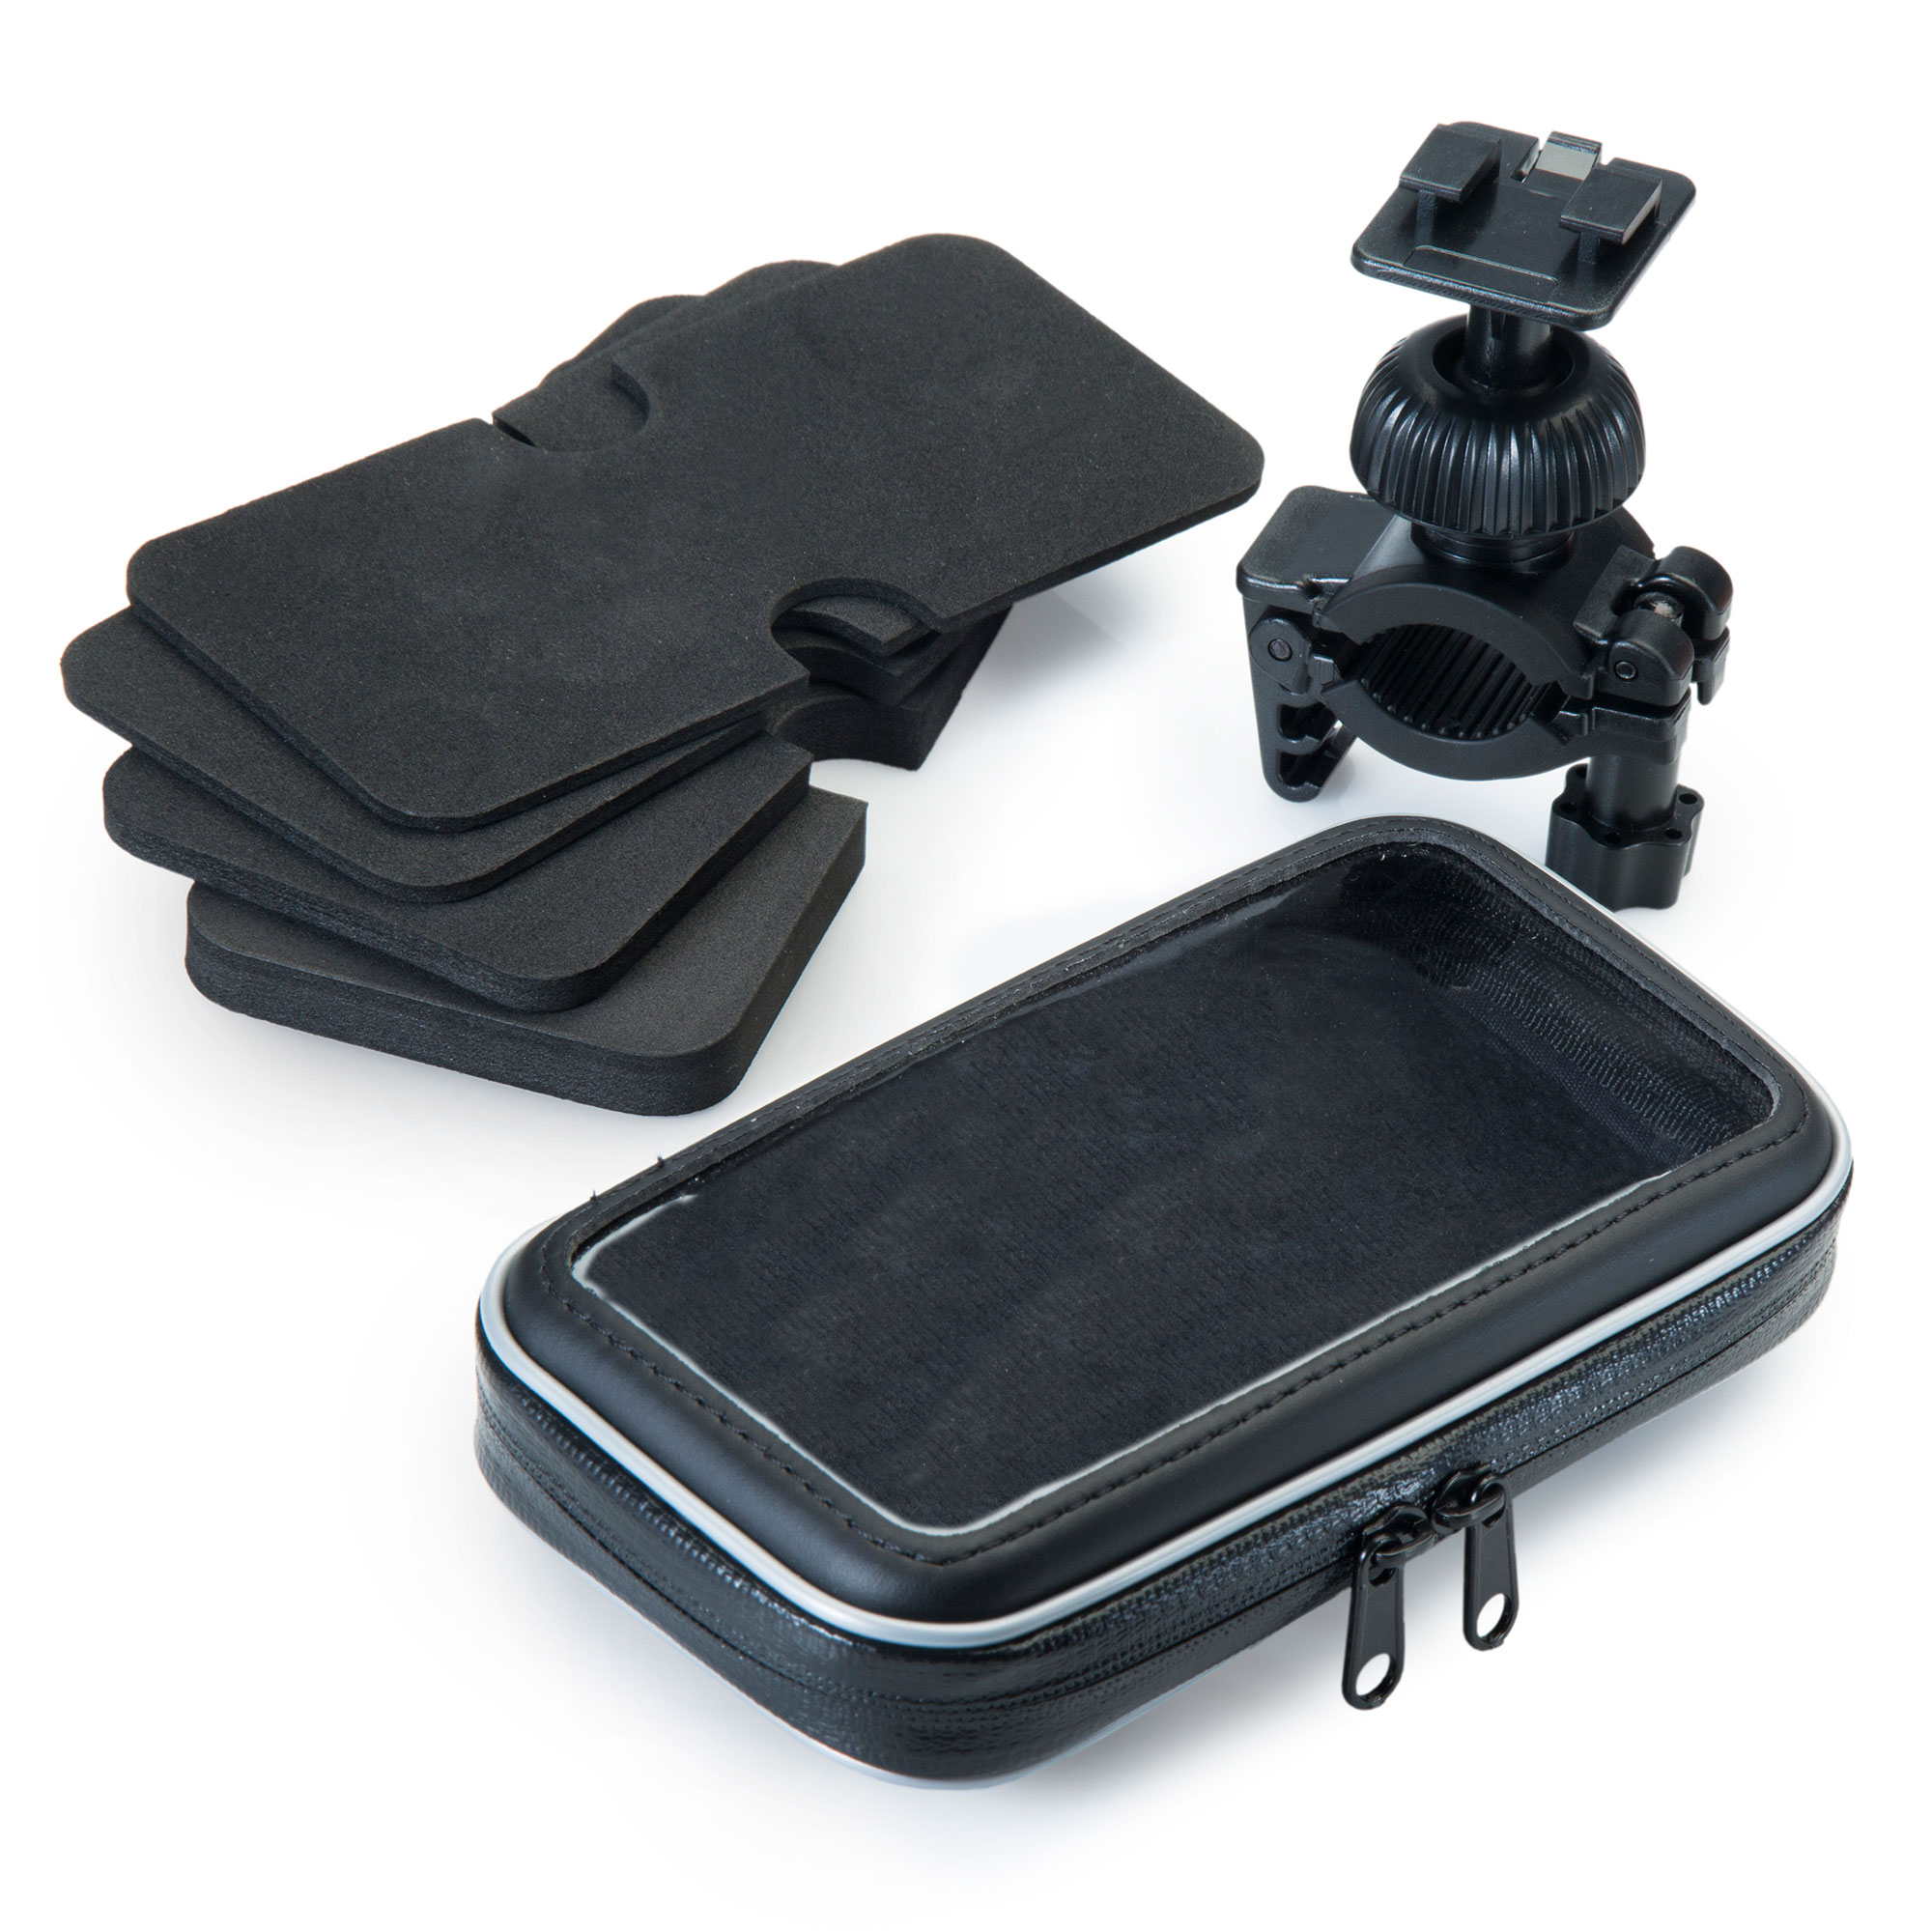 Heavy Duty Weather Resistant Bicycle / Motorcycle Handlebar Mount Holder Designed for the LG Optimus Sol